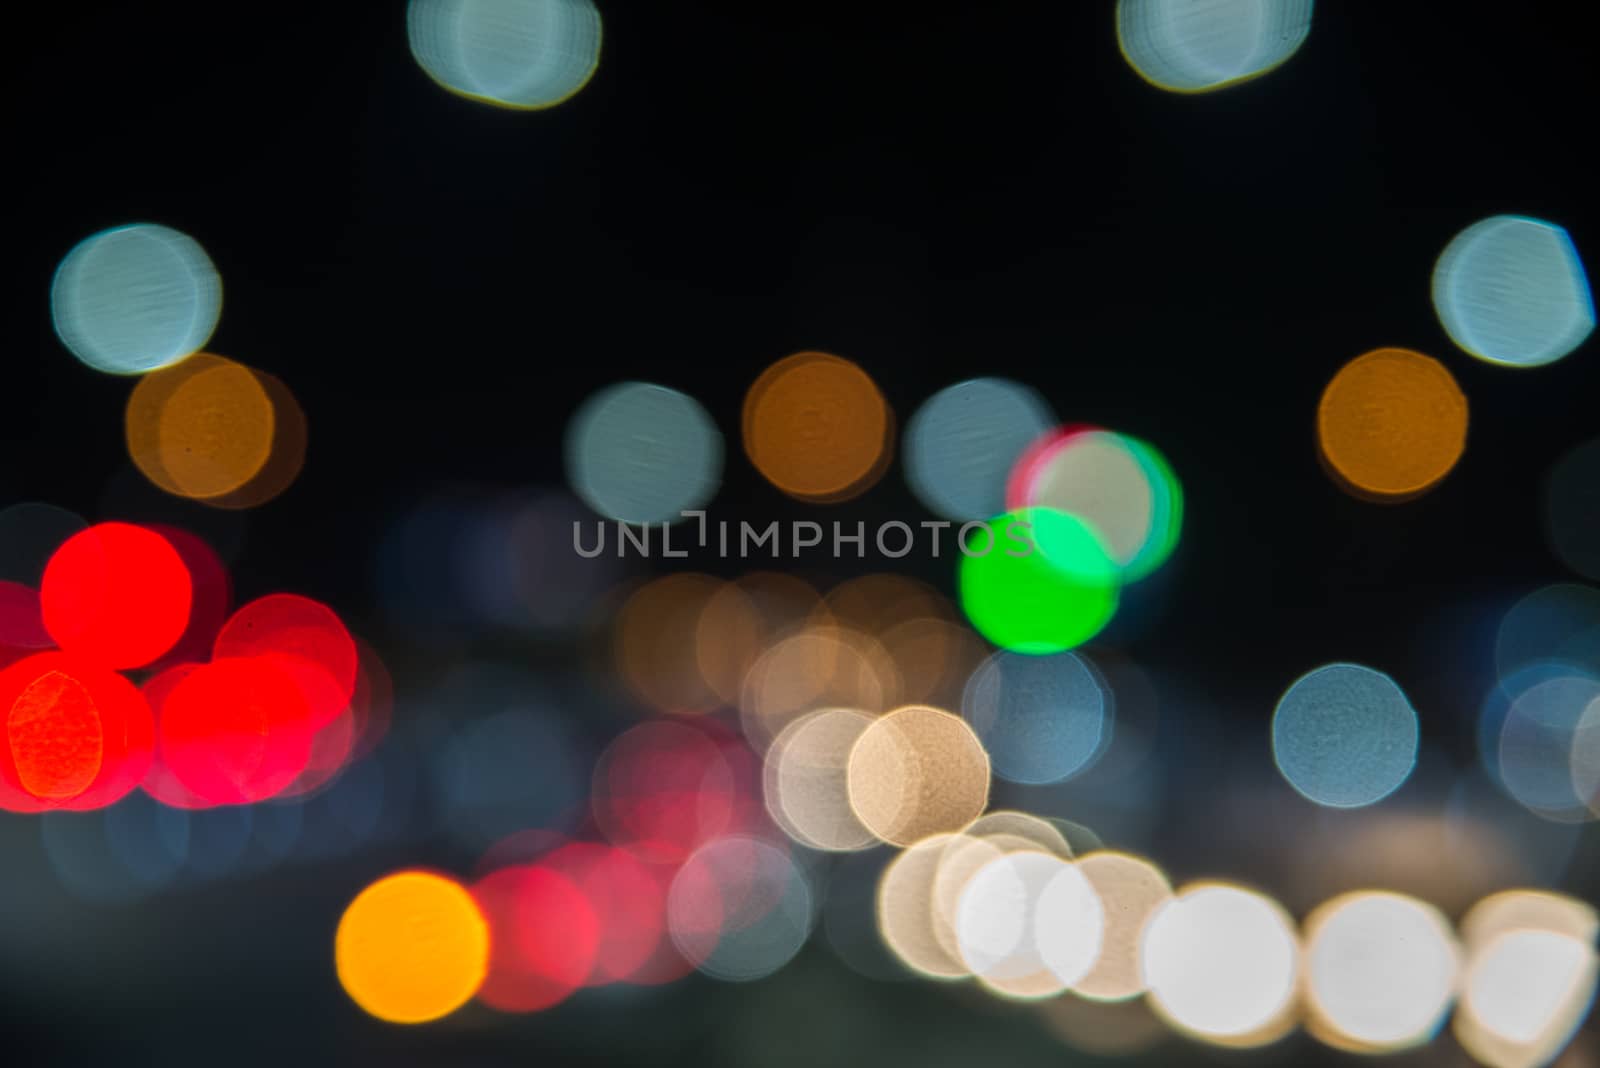 boken blurry abstract by Soranop01